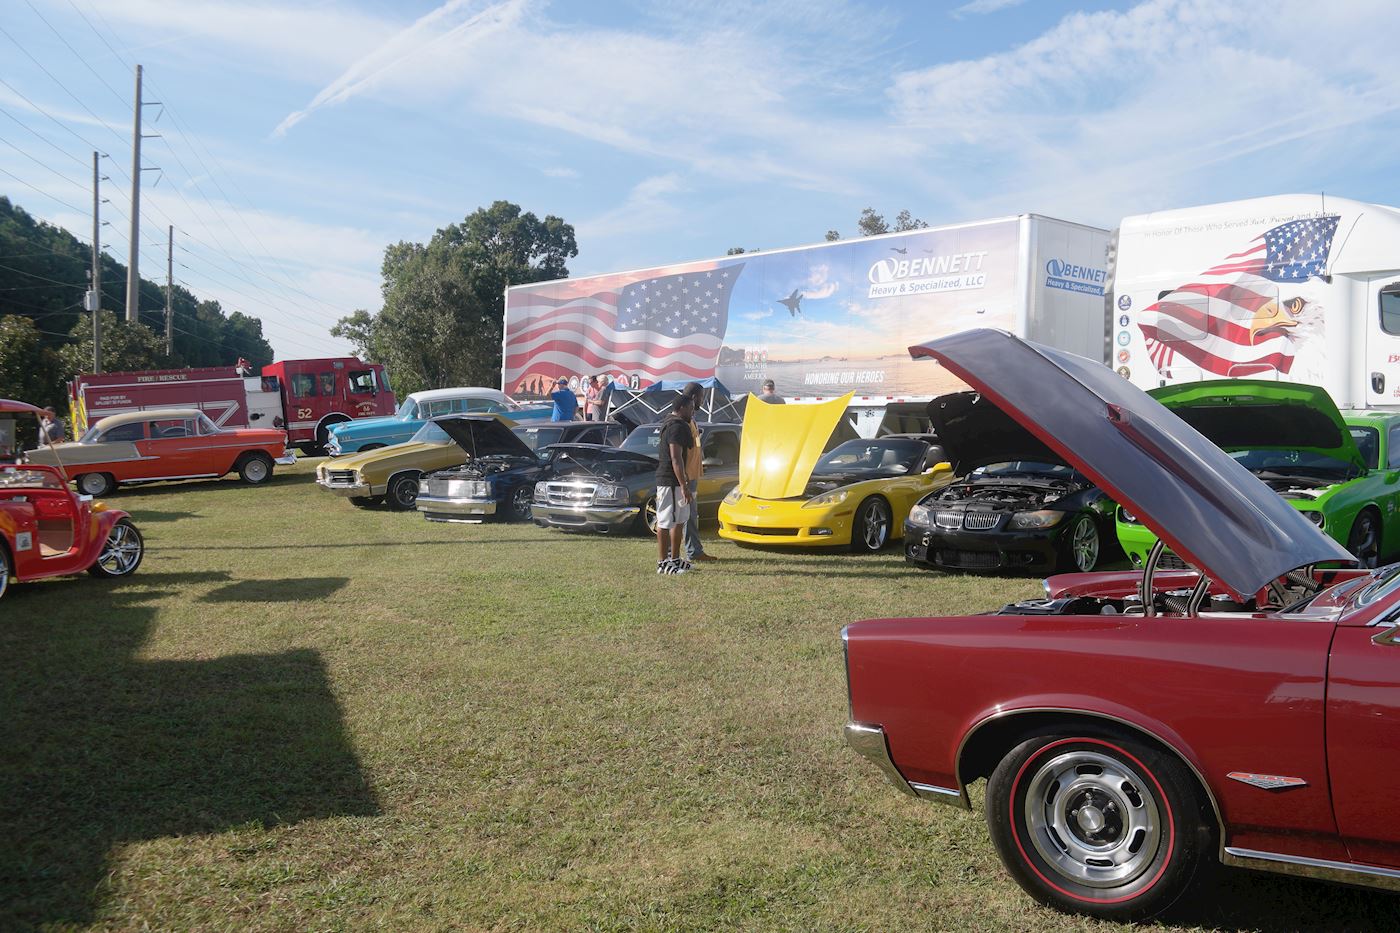 A car show was held on the front lawn to raise money for Wreaths Across America